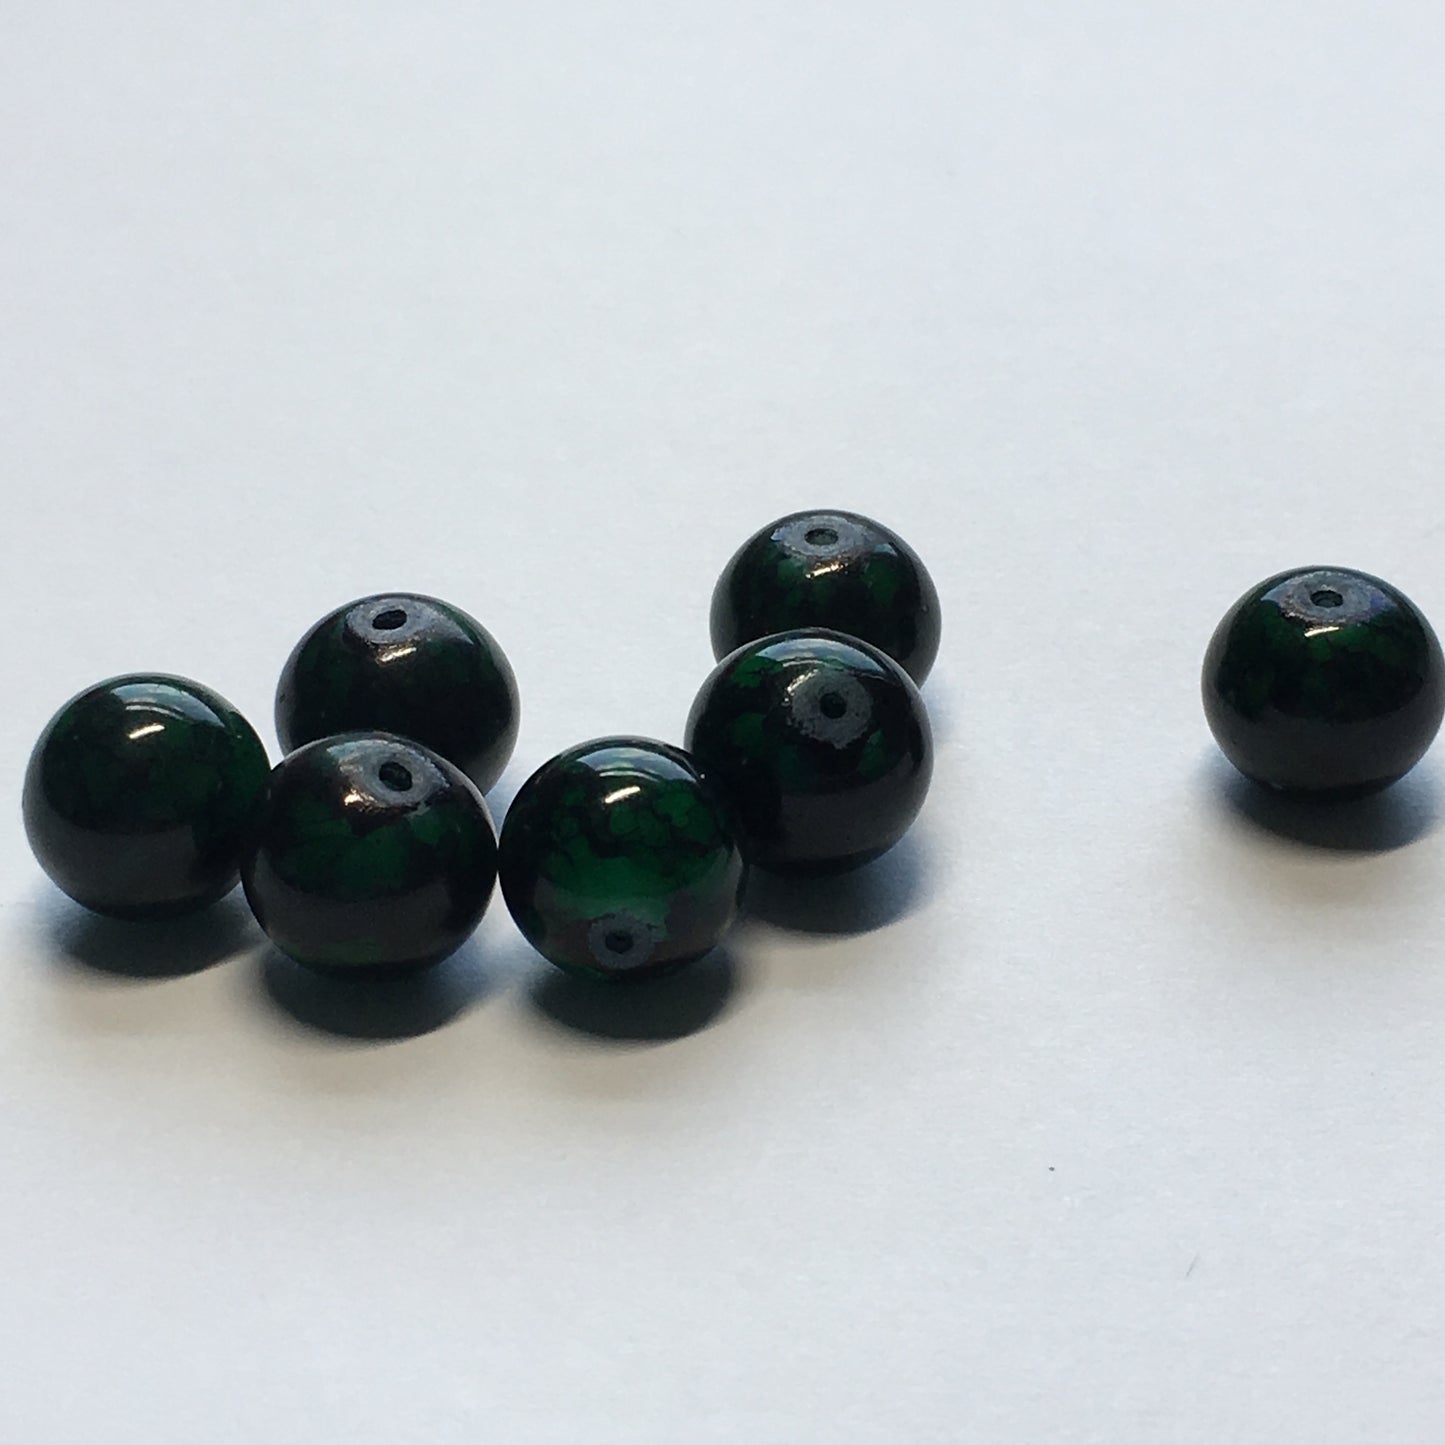 Green Painted Glass Beads 10 mm, 7 Beads